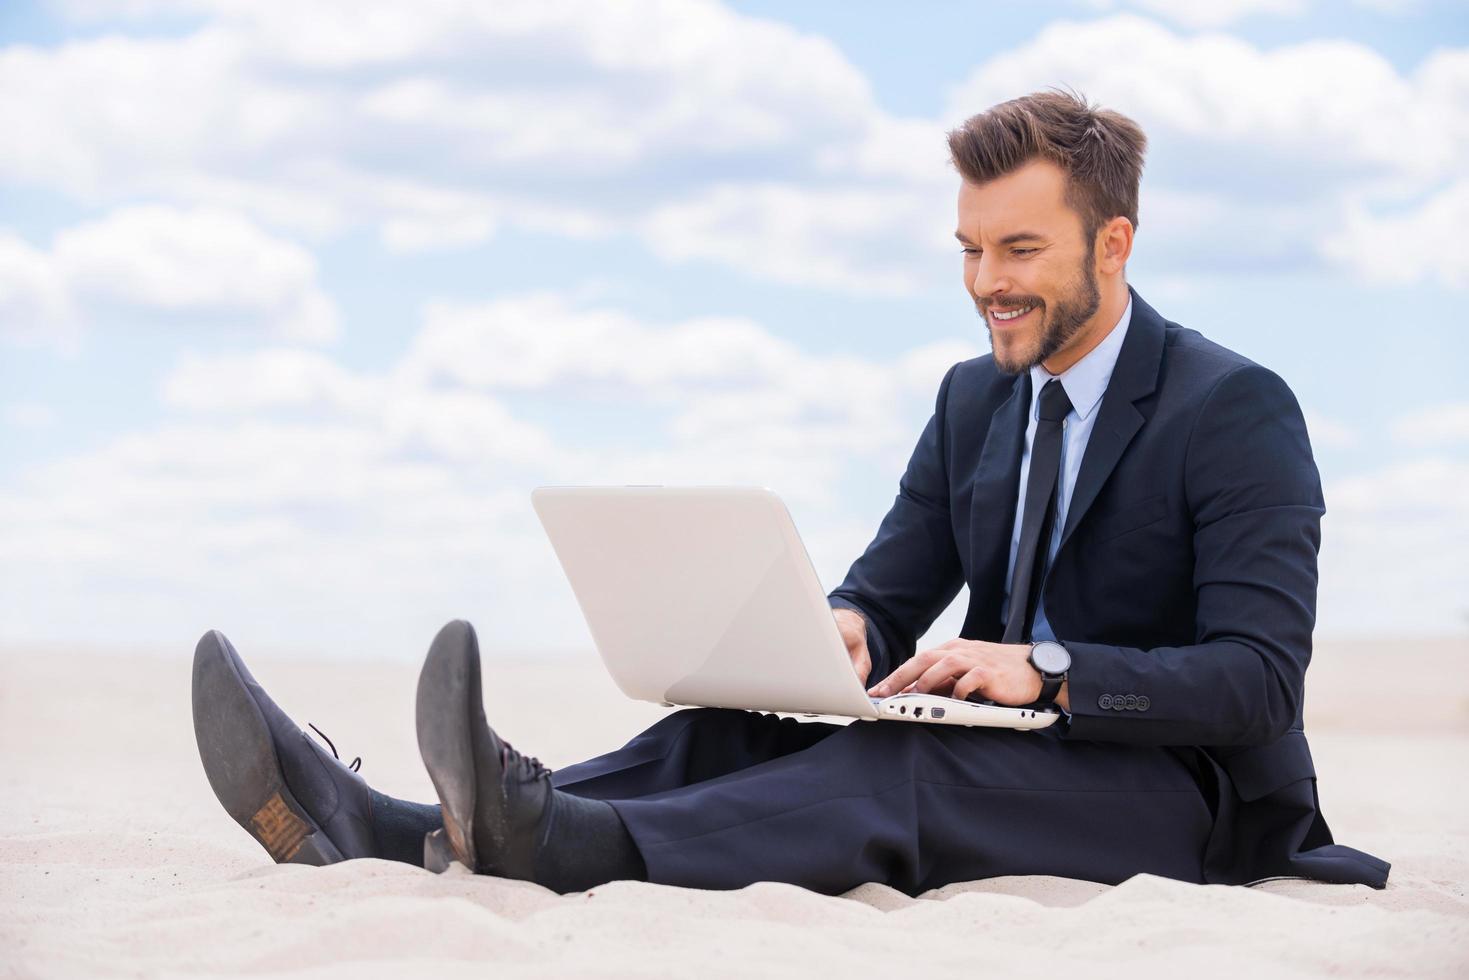 Great place to work. Cheerful young man in formalwear working on laptop while sitting on sand in desert photo